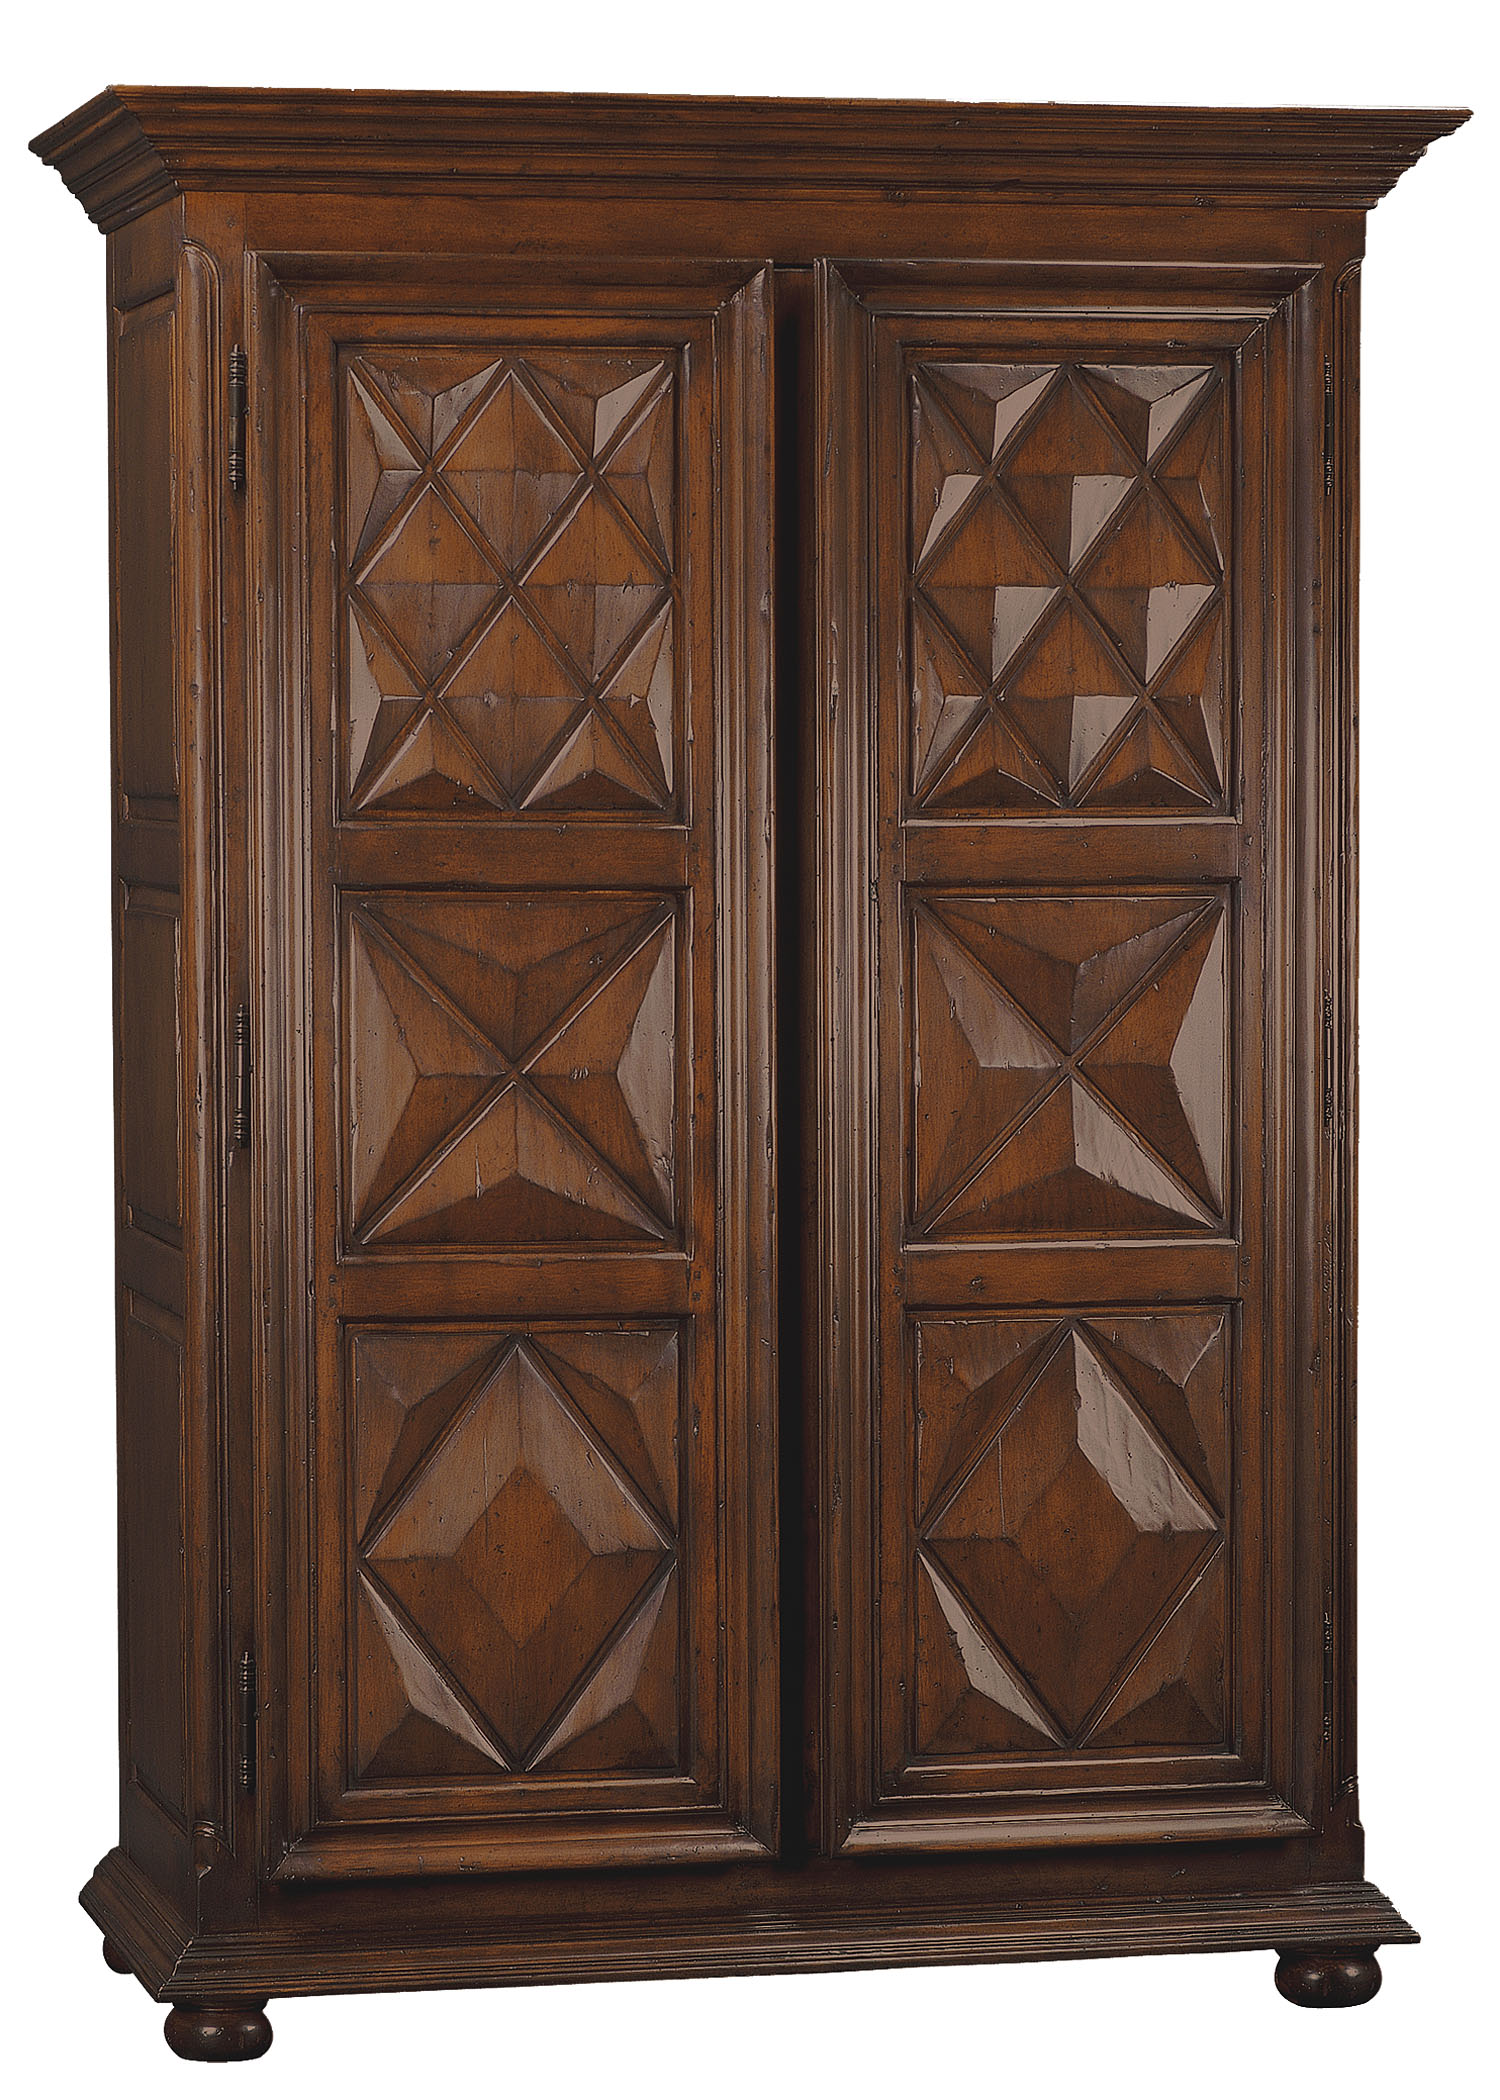 Dimitri traditional armoire cabinet by Woodland furniture in Idaho Falls USA